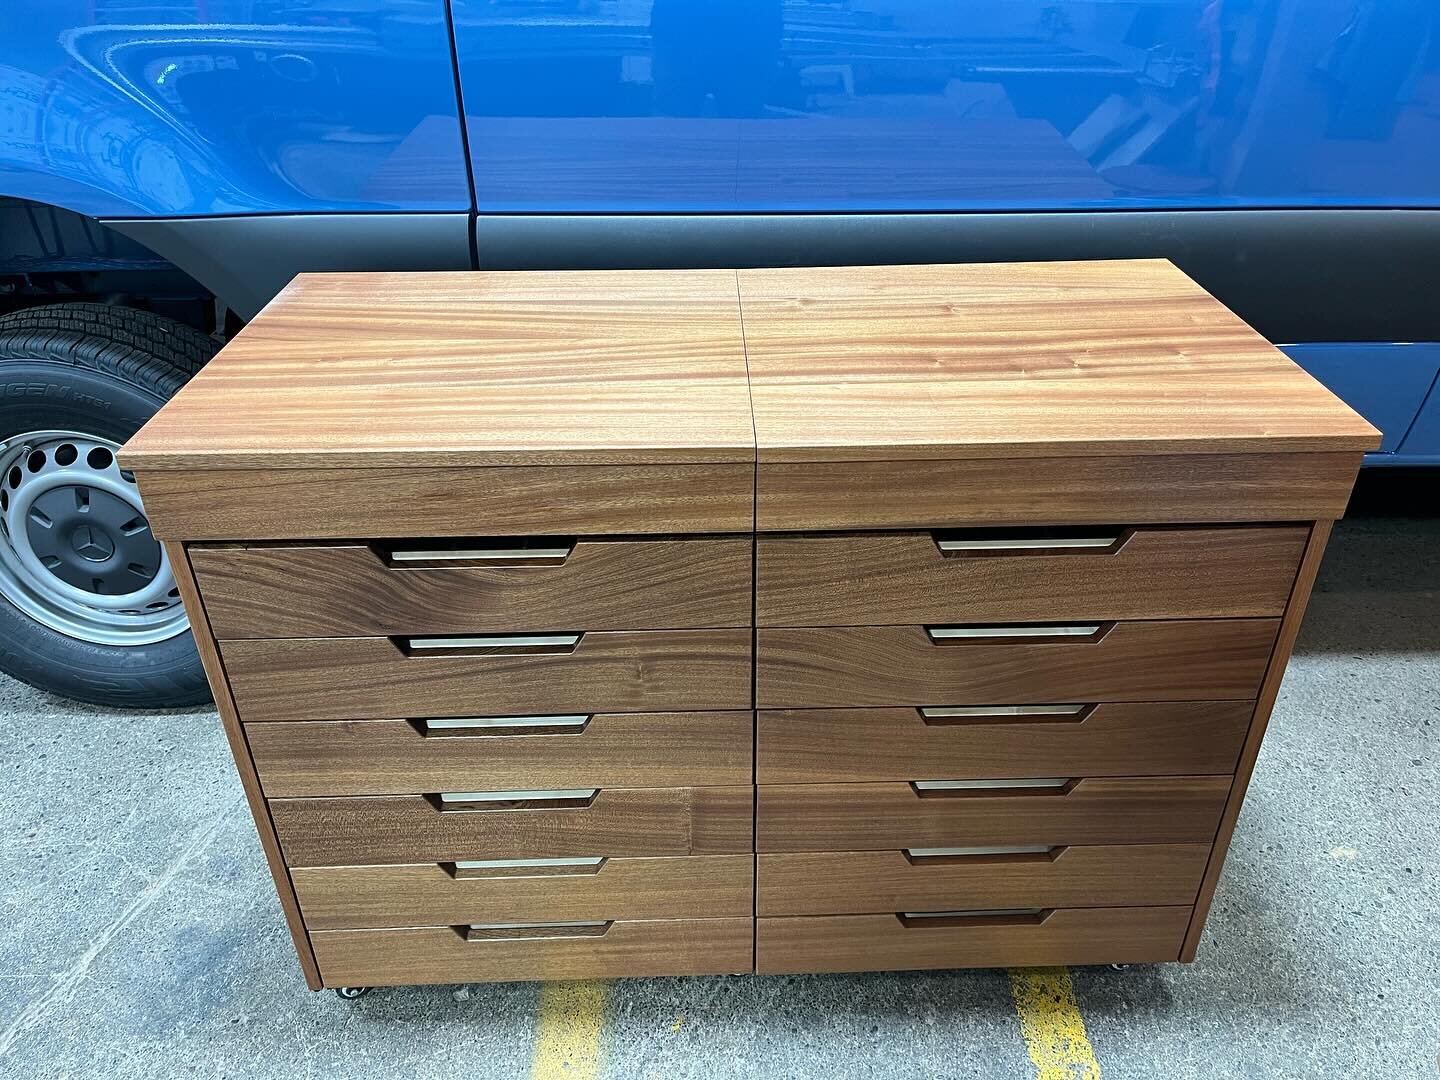 Custom taboret artist table we made for a past van build client. They liked the woods in their van we made for them so we decided to keep the mahogany and maple combination. 

We also included a Rembrandt style wet brush holder. The brushes rest in a